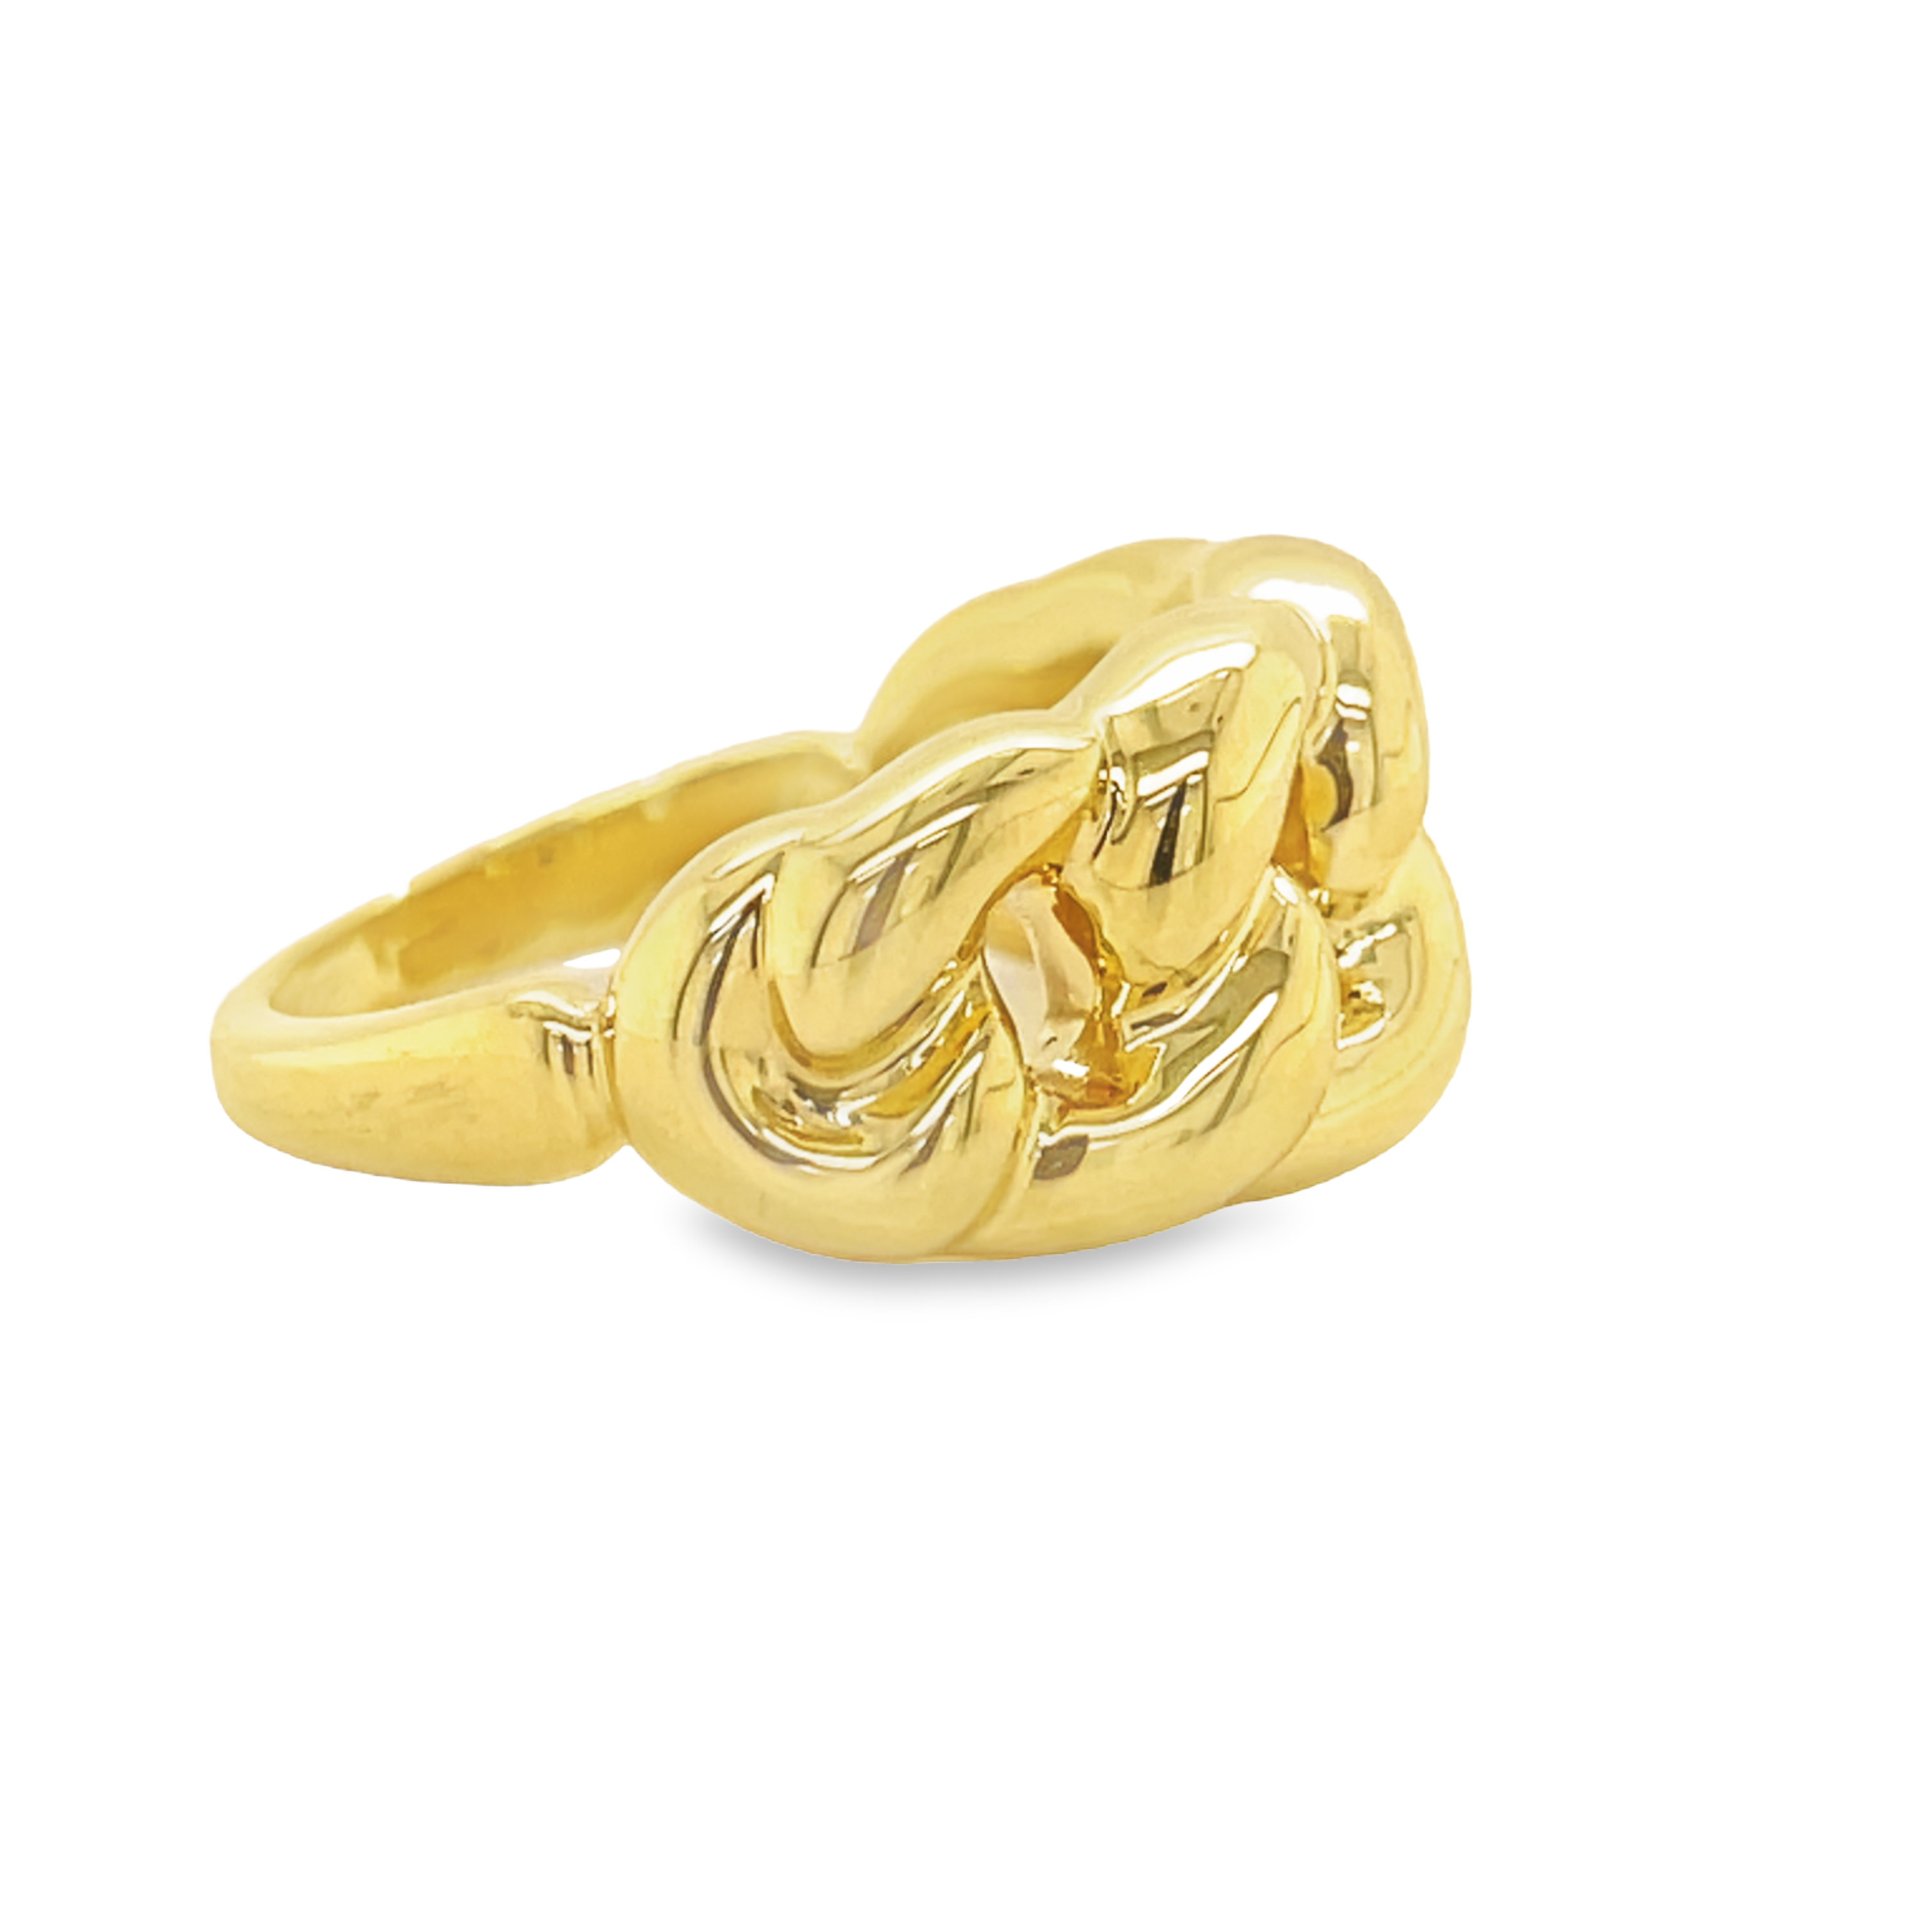 Expertly crafted in Italy, this 14k yellow gold chain link ring adds a touch of elegance to any look. The unique chain link style showcases the superior craftsmanship of Italian jewelry makers. Made with 14k gold, this ring is the perfect statement piece for any fashion-forward individual.